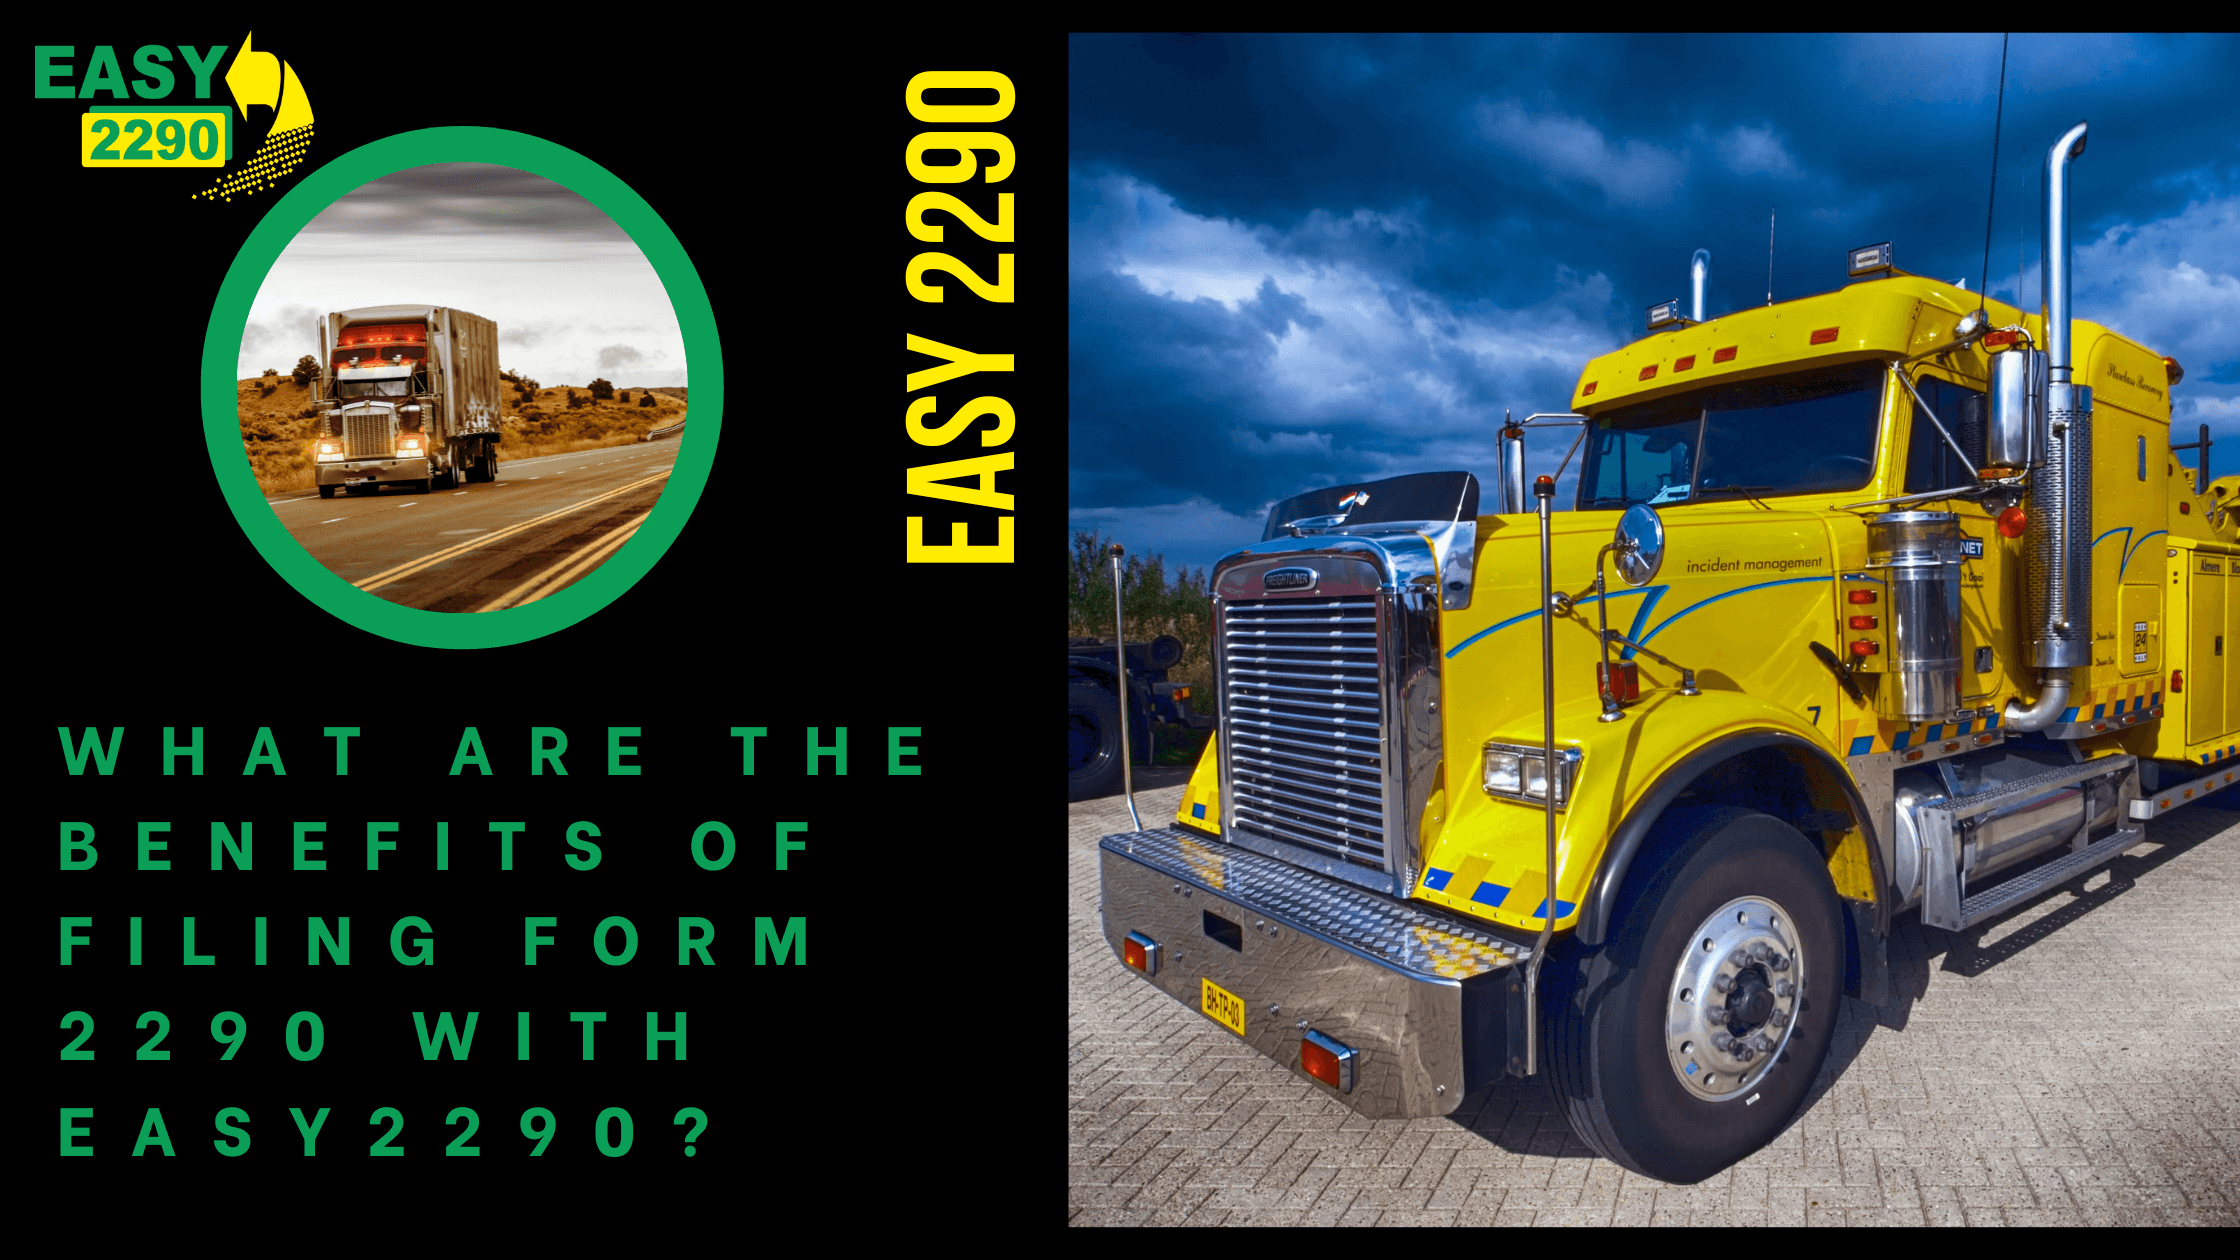 What are the benefits of filing Form 2290 with Easy2290?